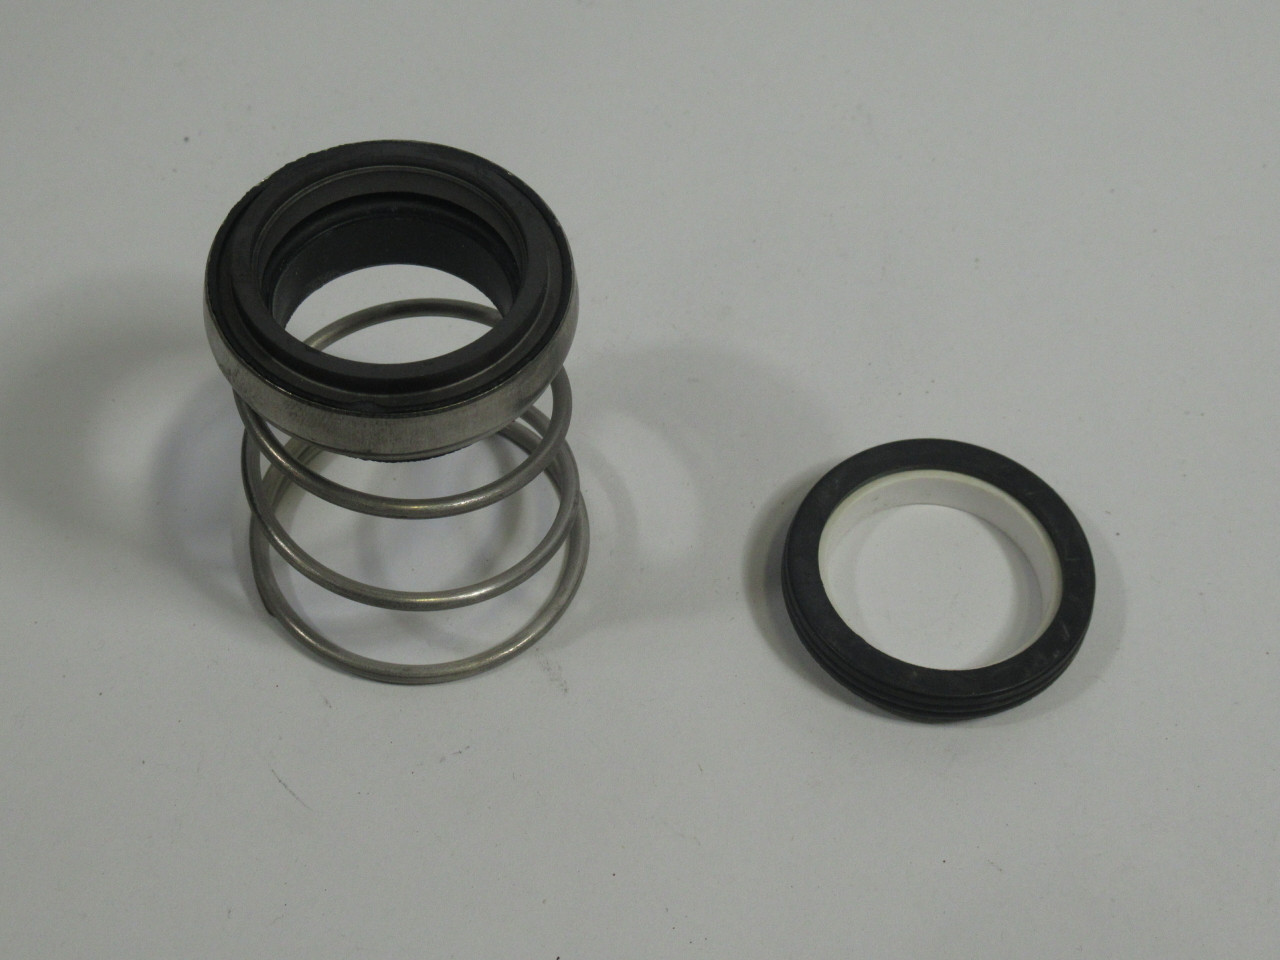 Pac-Seal PAC402 Rotary Seal 1-1/4" ! NEW !